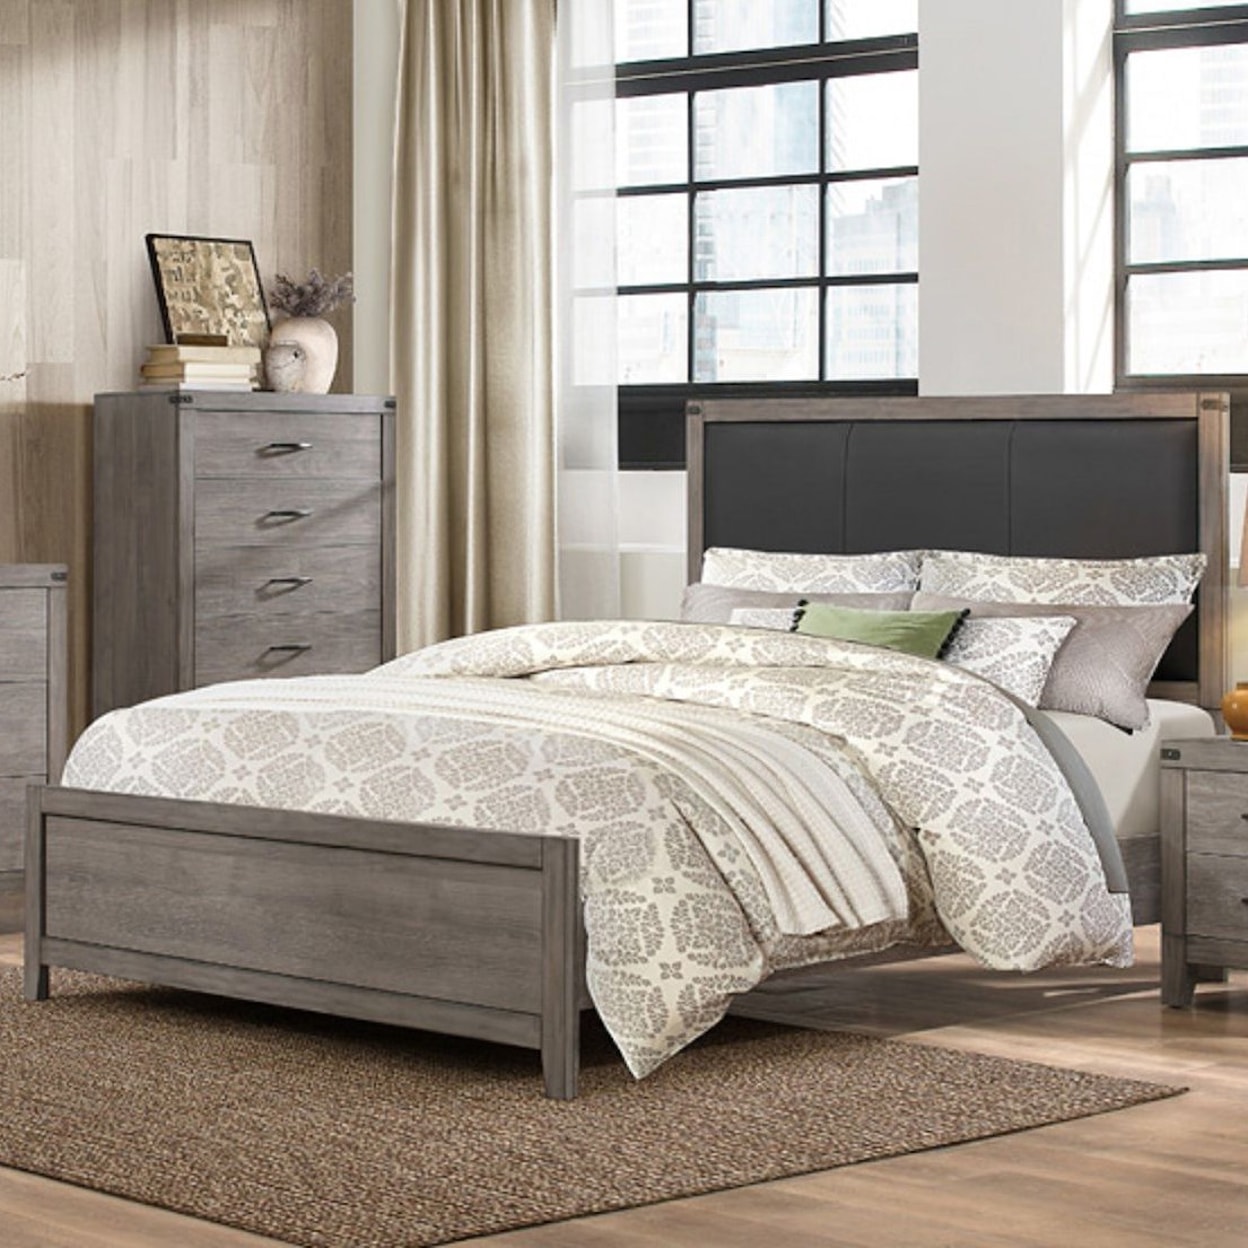 Homelegance Furniture 2042 Contemporary Queen Bed